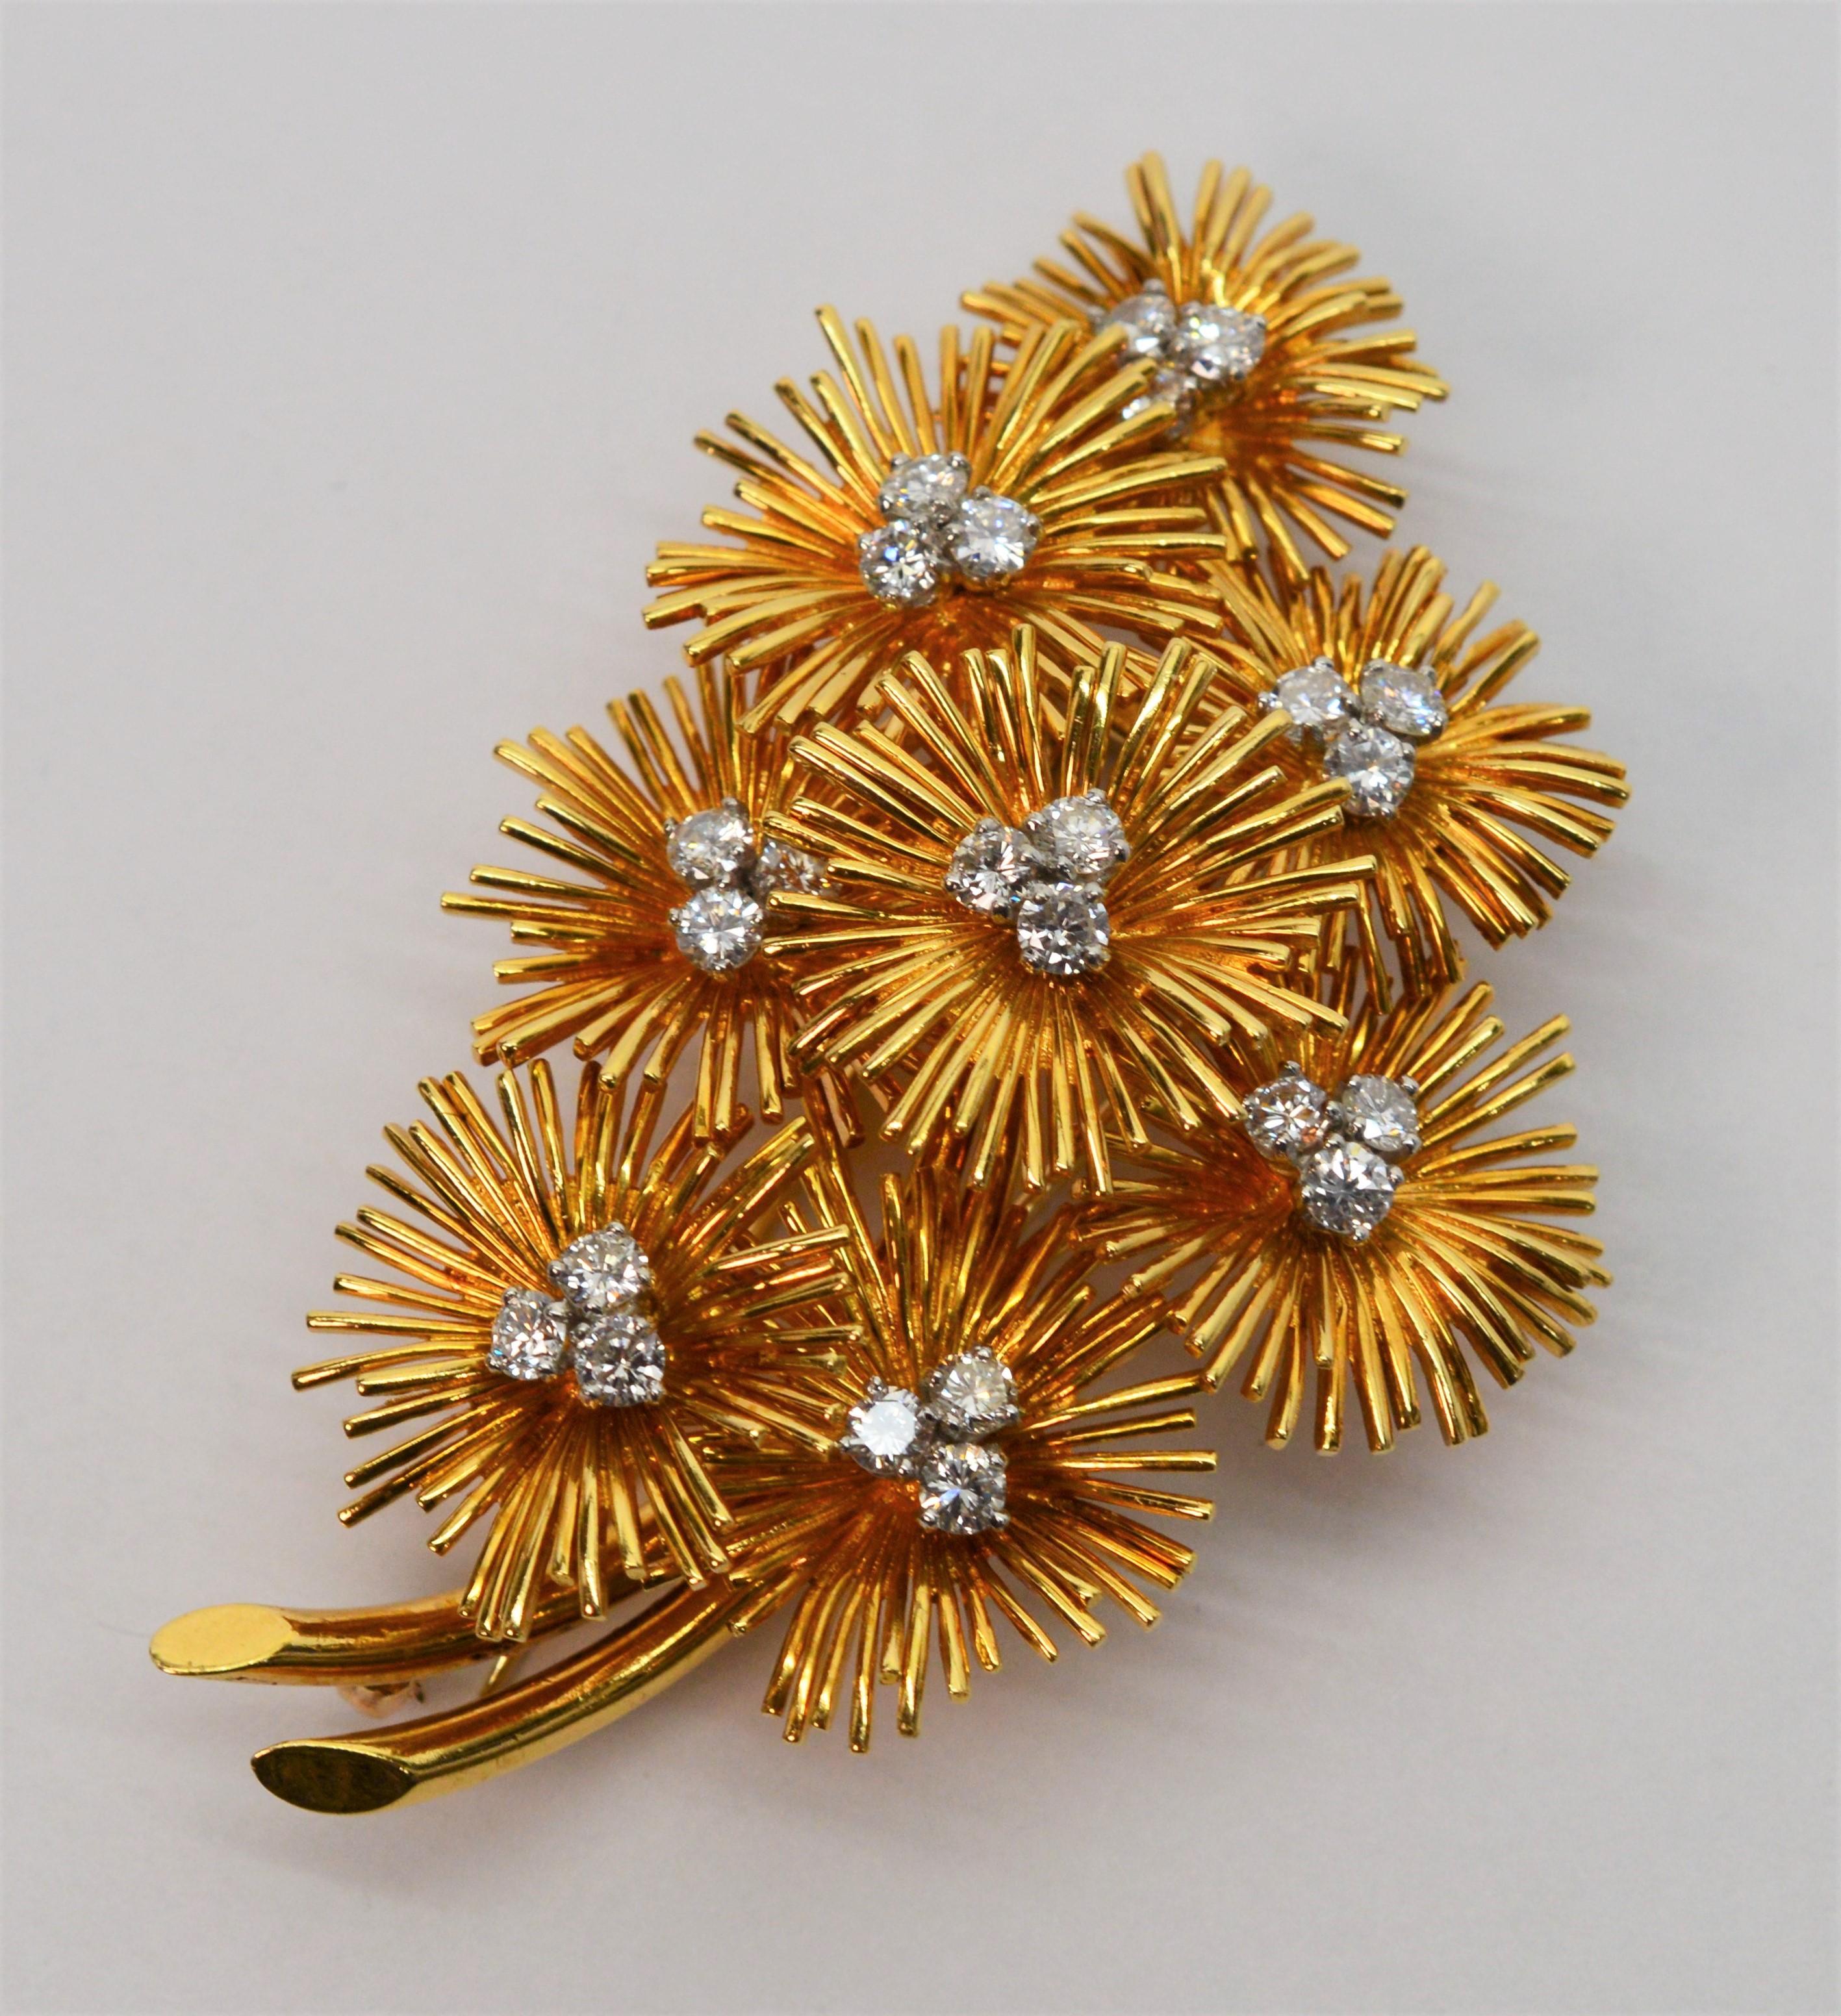 Three dimensional drama in eighteen karat 18K yellow gold and diamonds describes this stunning vintage Van Cleef & Arpels Brooch. Eight meticulously arranged floral bursts are expertly crafted in bright eighteen karat yellow gold creating elegant